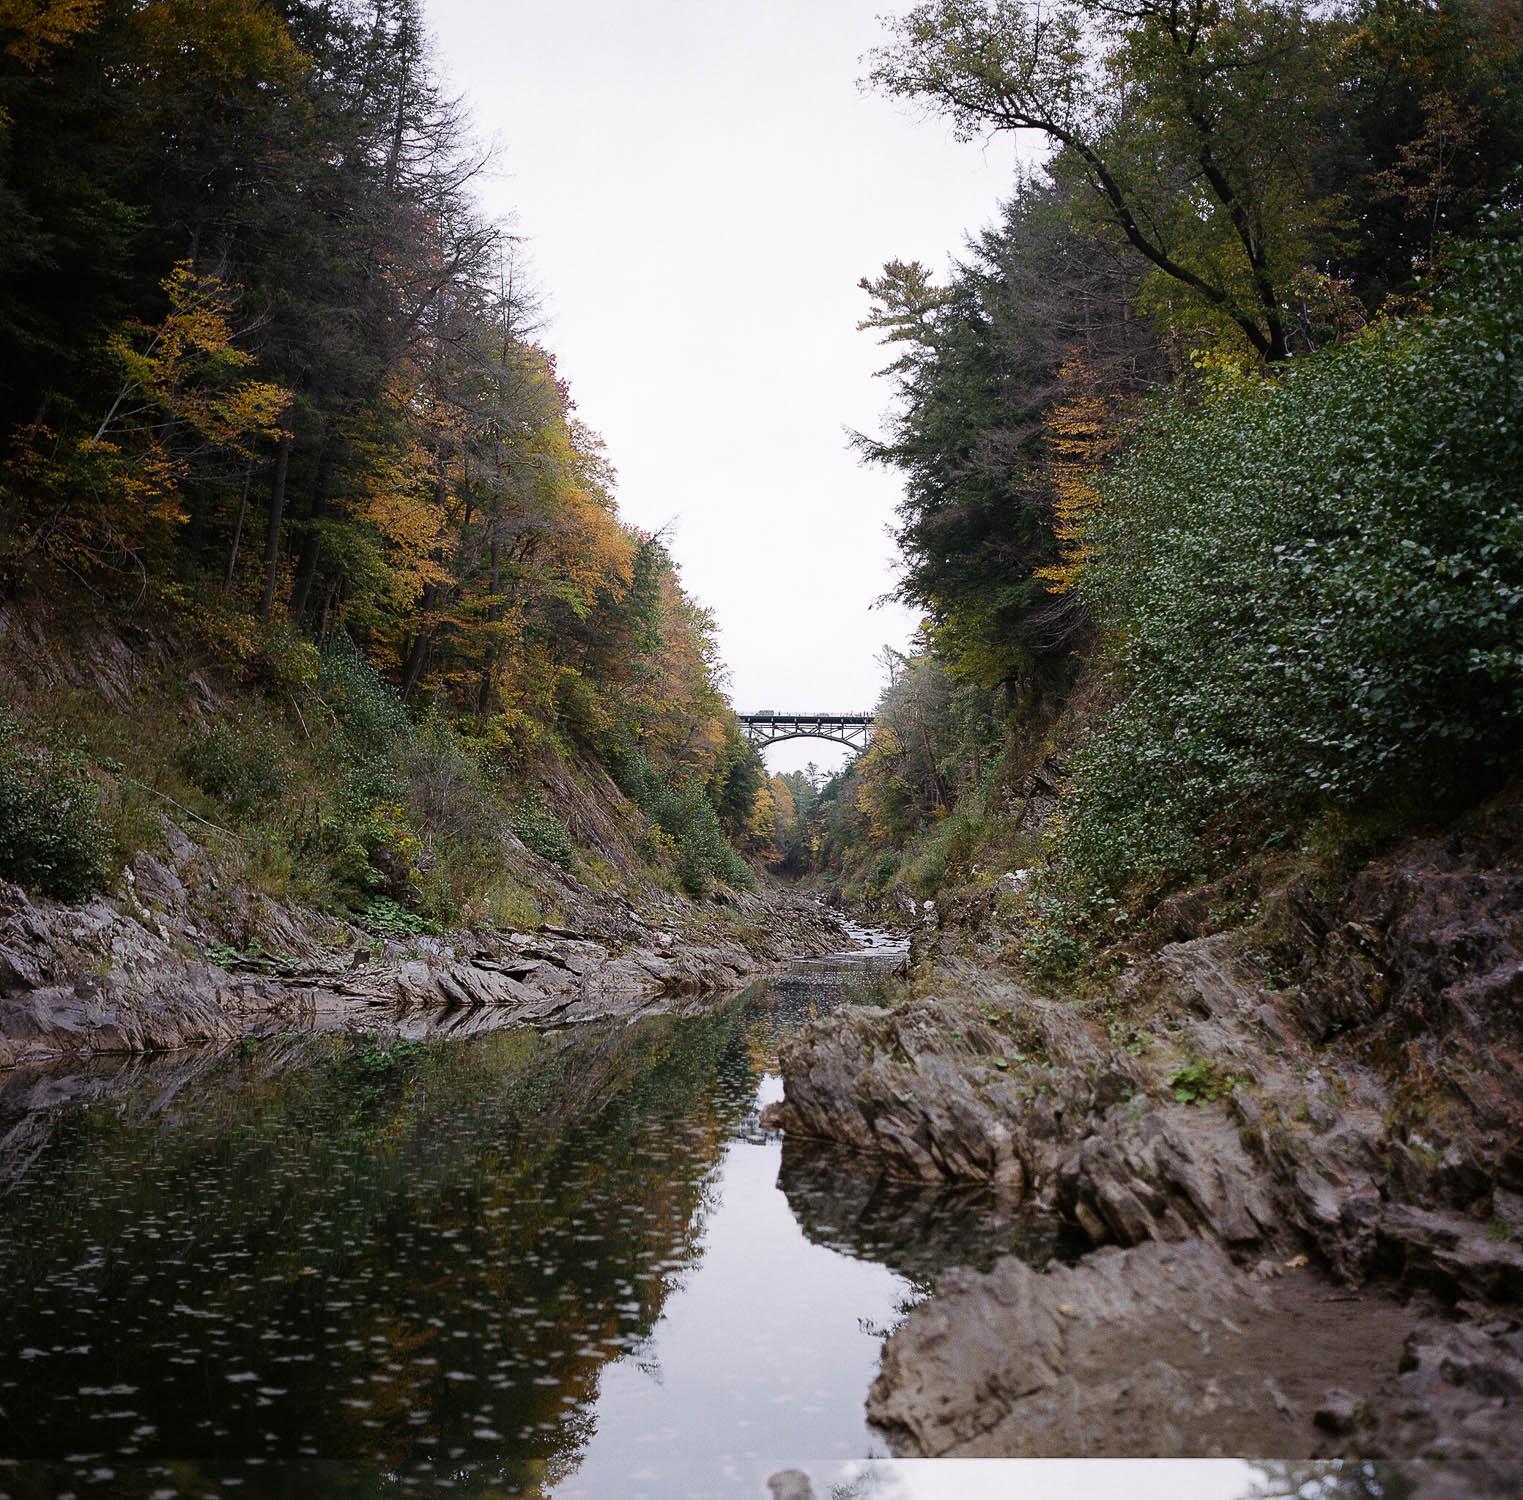 The bridge from the water's edge at Quechee Gorge